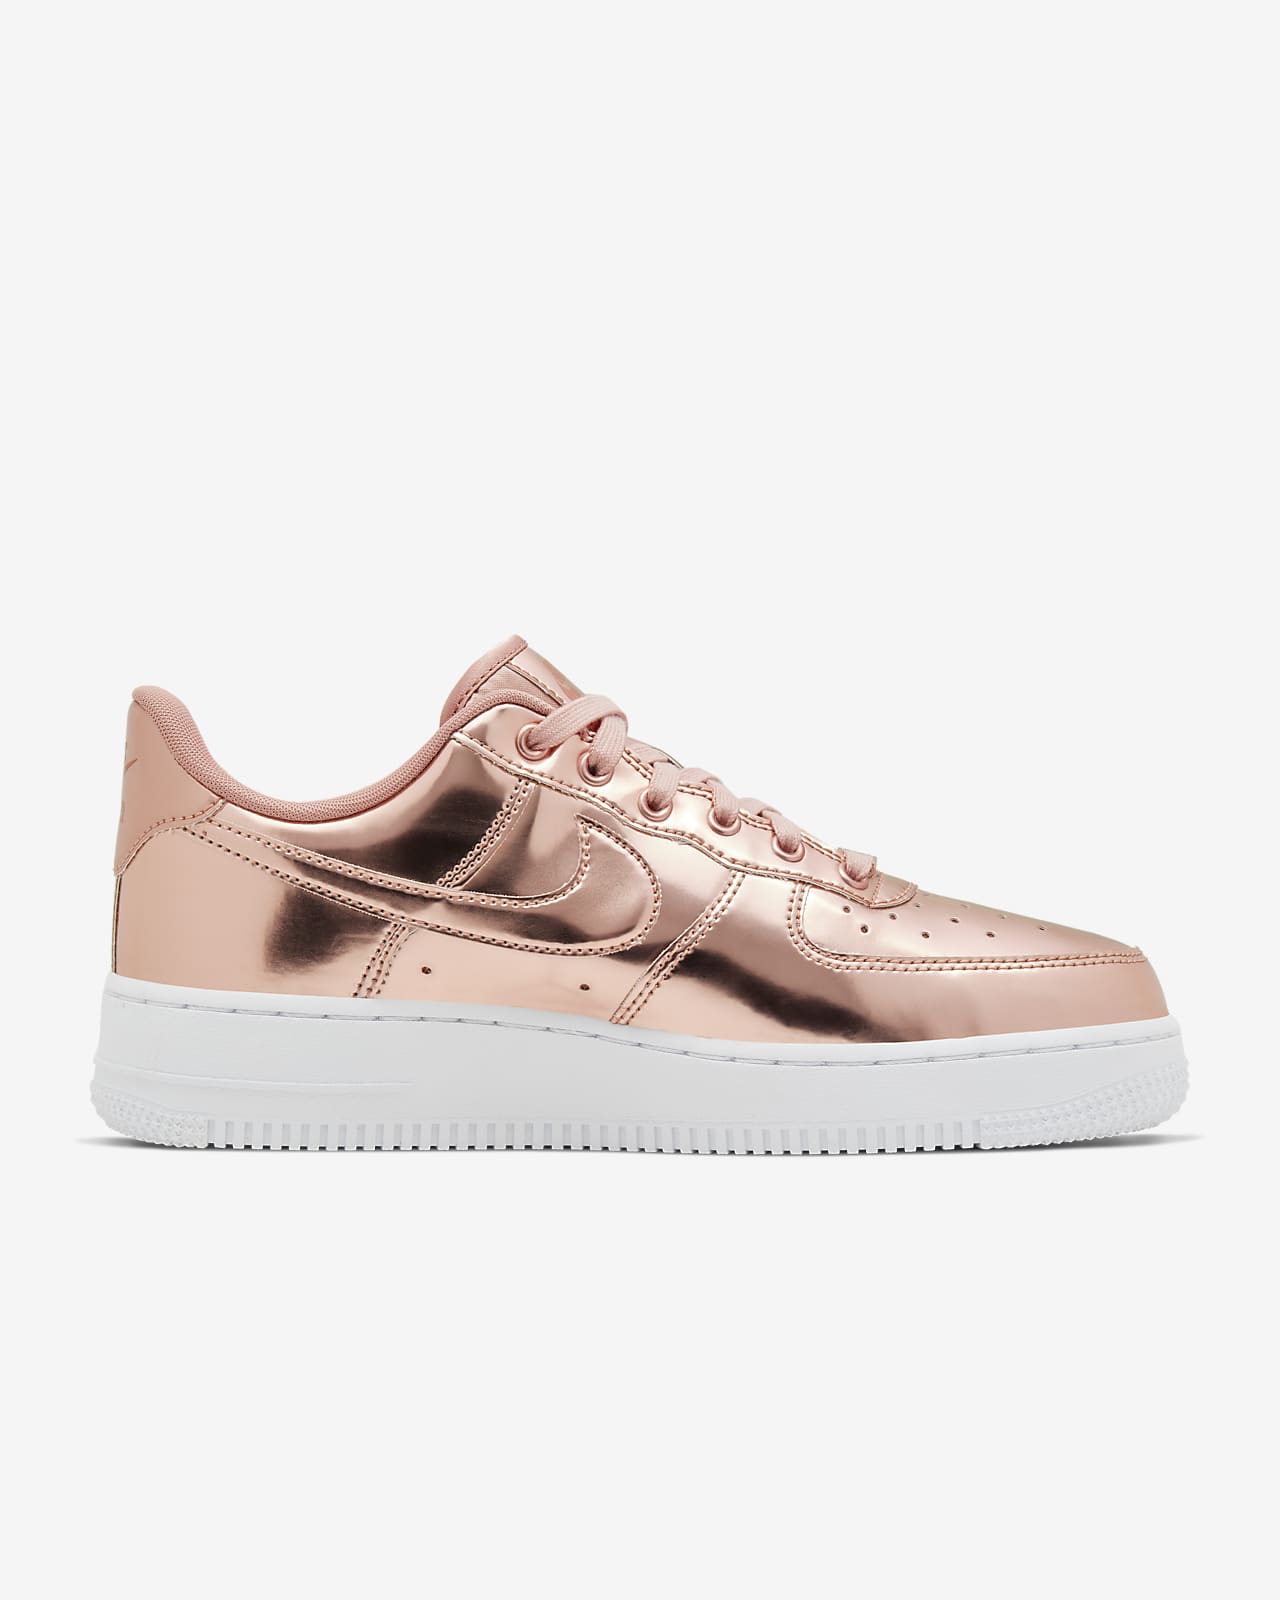 Nike Air Force 1 SP Women's Shoes